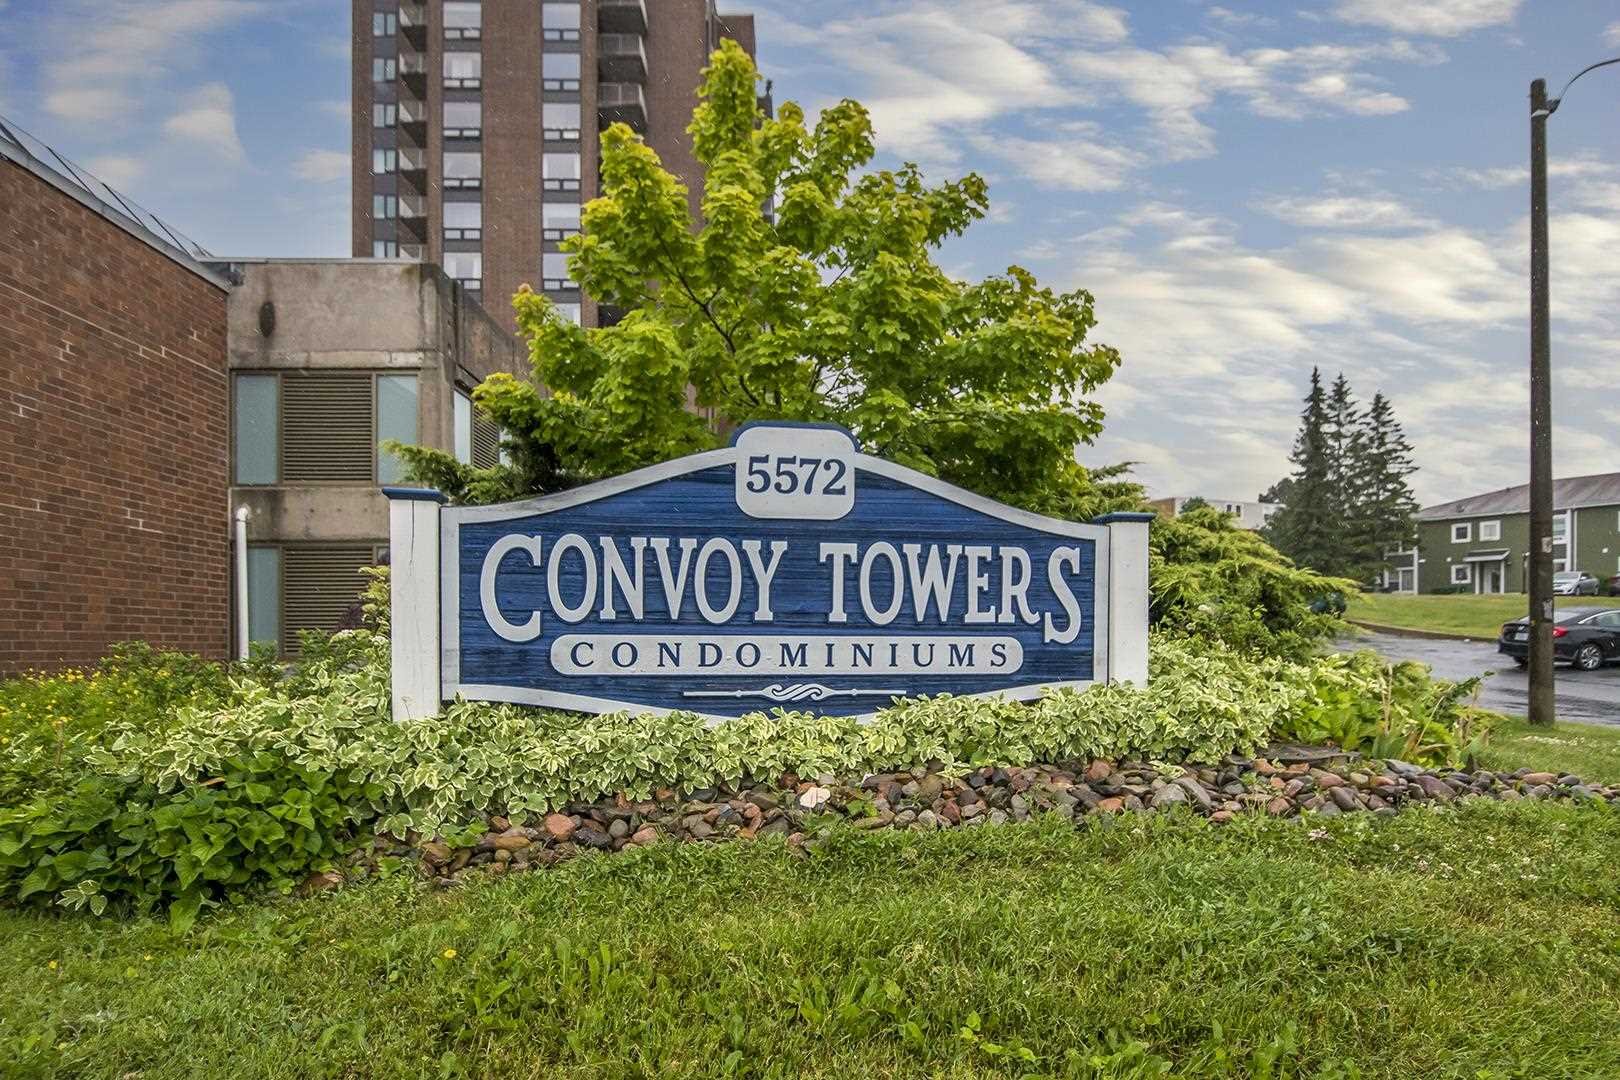 Convoy Towers